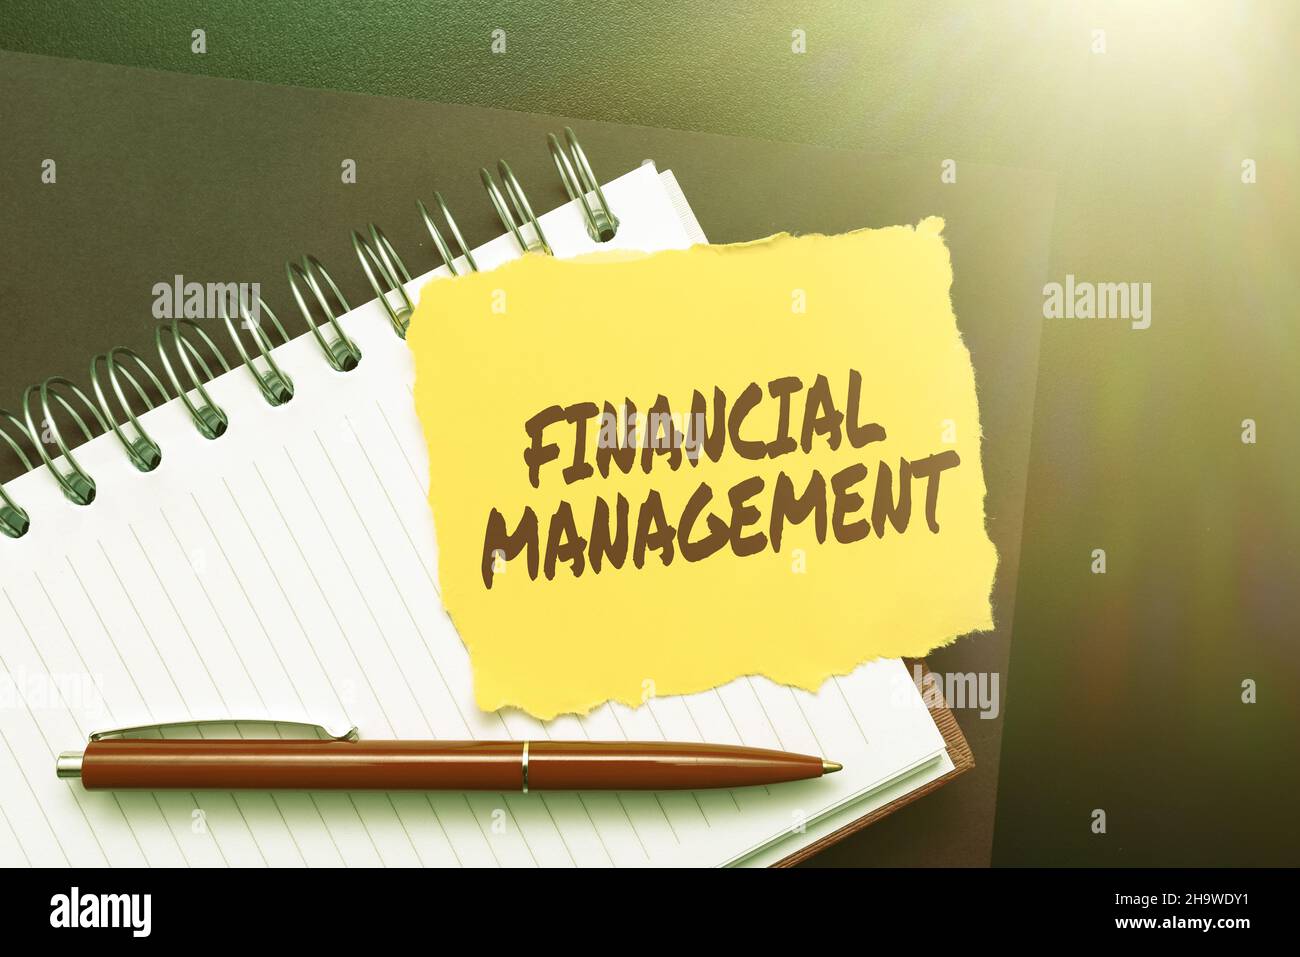 Writing displaying text Financial Management. Internet Concept efficient and effective way to Manage Money and Funds Thinking New Bright Ideas Stock Photo